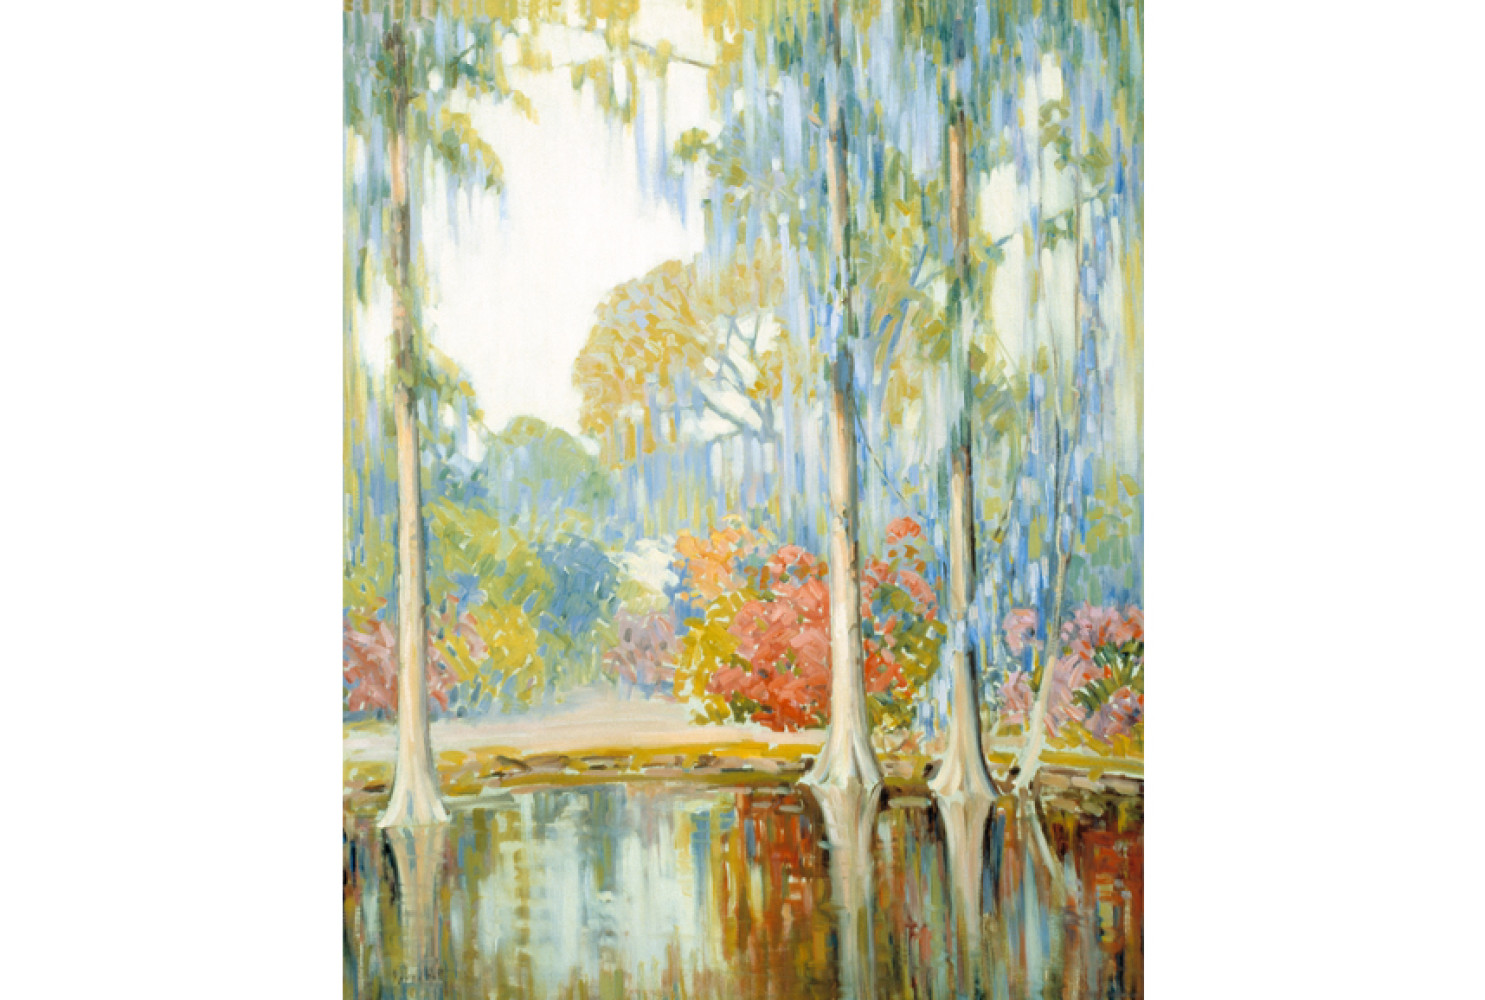 Magnolia Gardens, 1920, by Alfred Hutty (American, 1877-1954); oil on canvas; 39 7/8 x 31 3/4 inches; Museum purchase from the artist; 1920.006.0001
